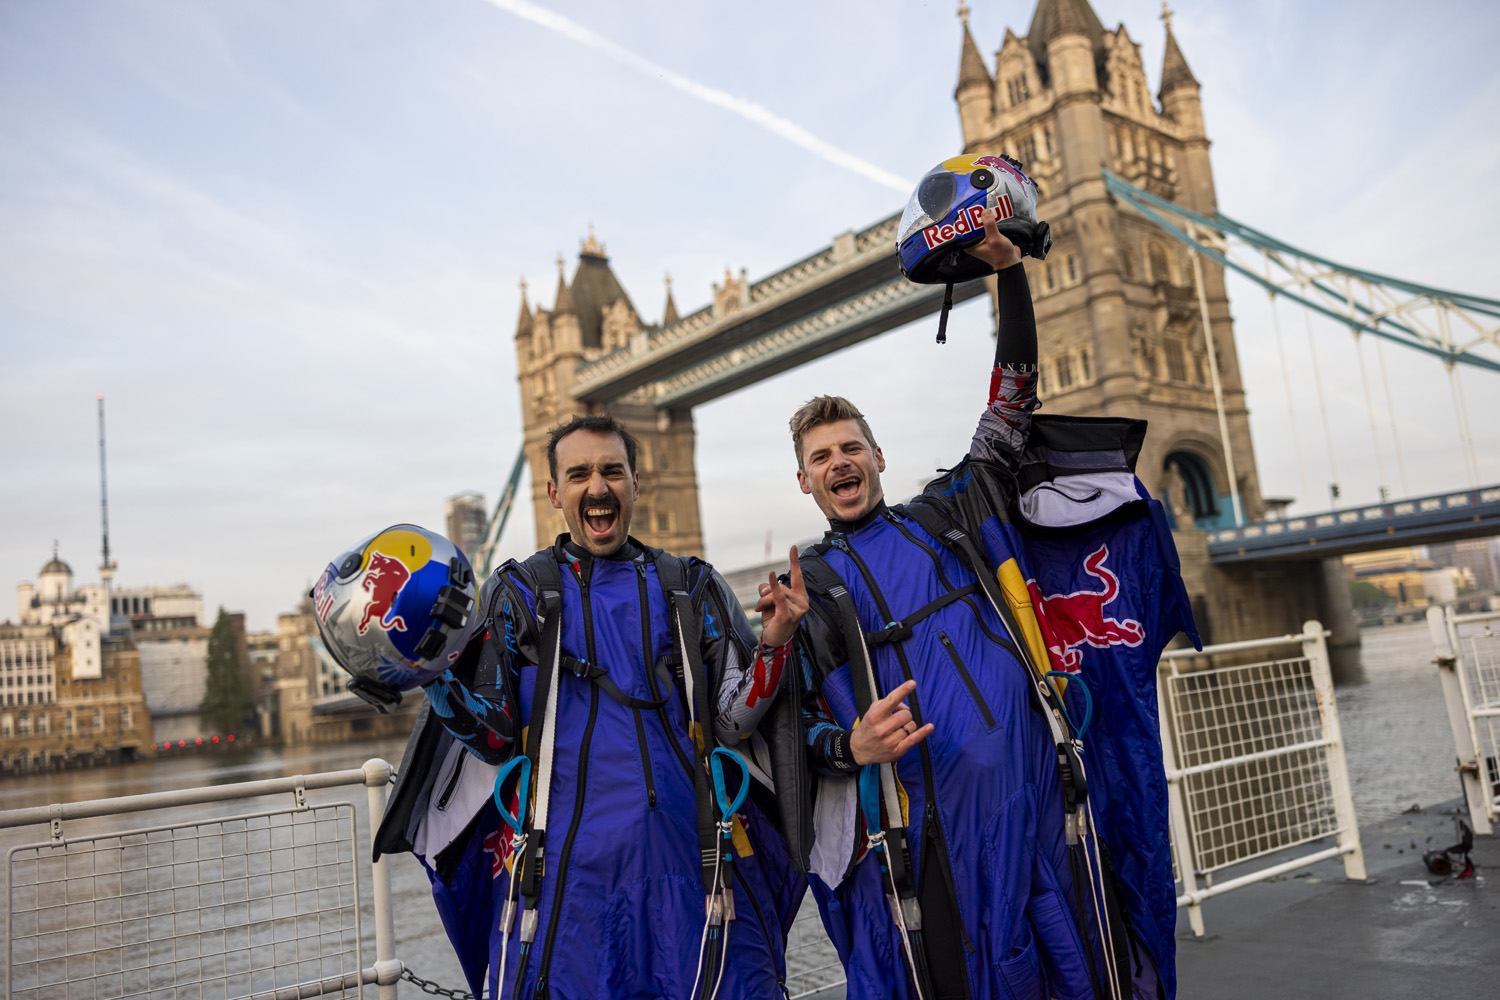 Marco Fuerst and Marco Waltenspiel of Austria are seen after their flight through Tower Bridge in London, Great Britain on May 12, 2024.